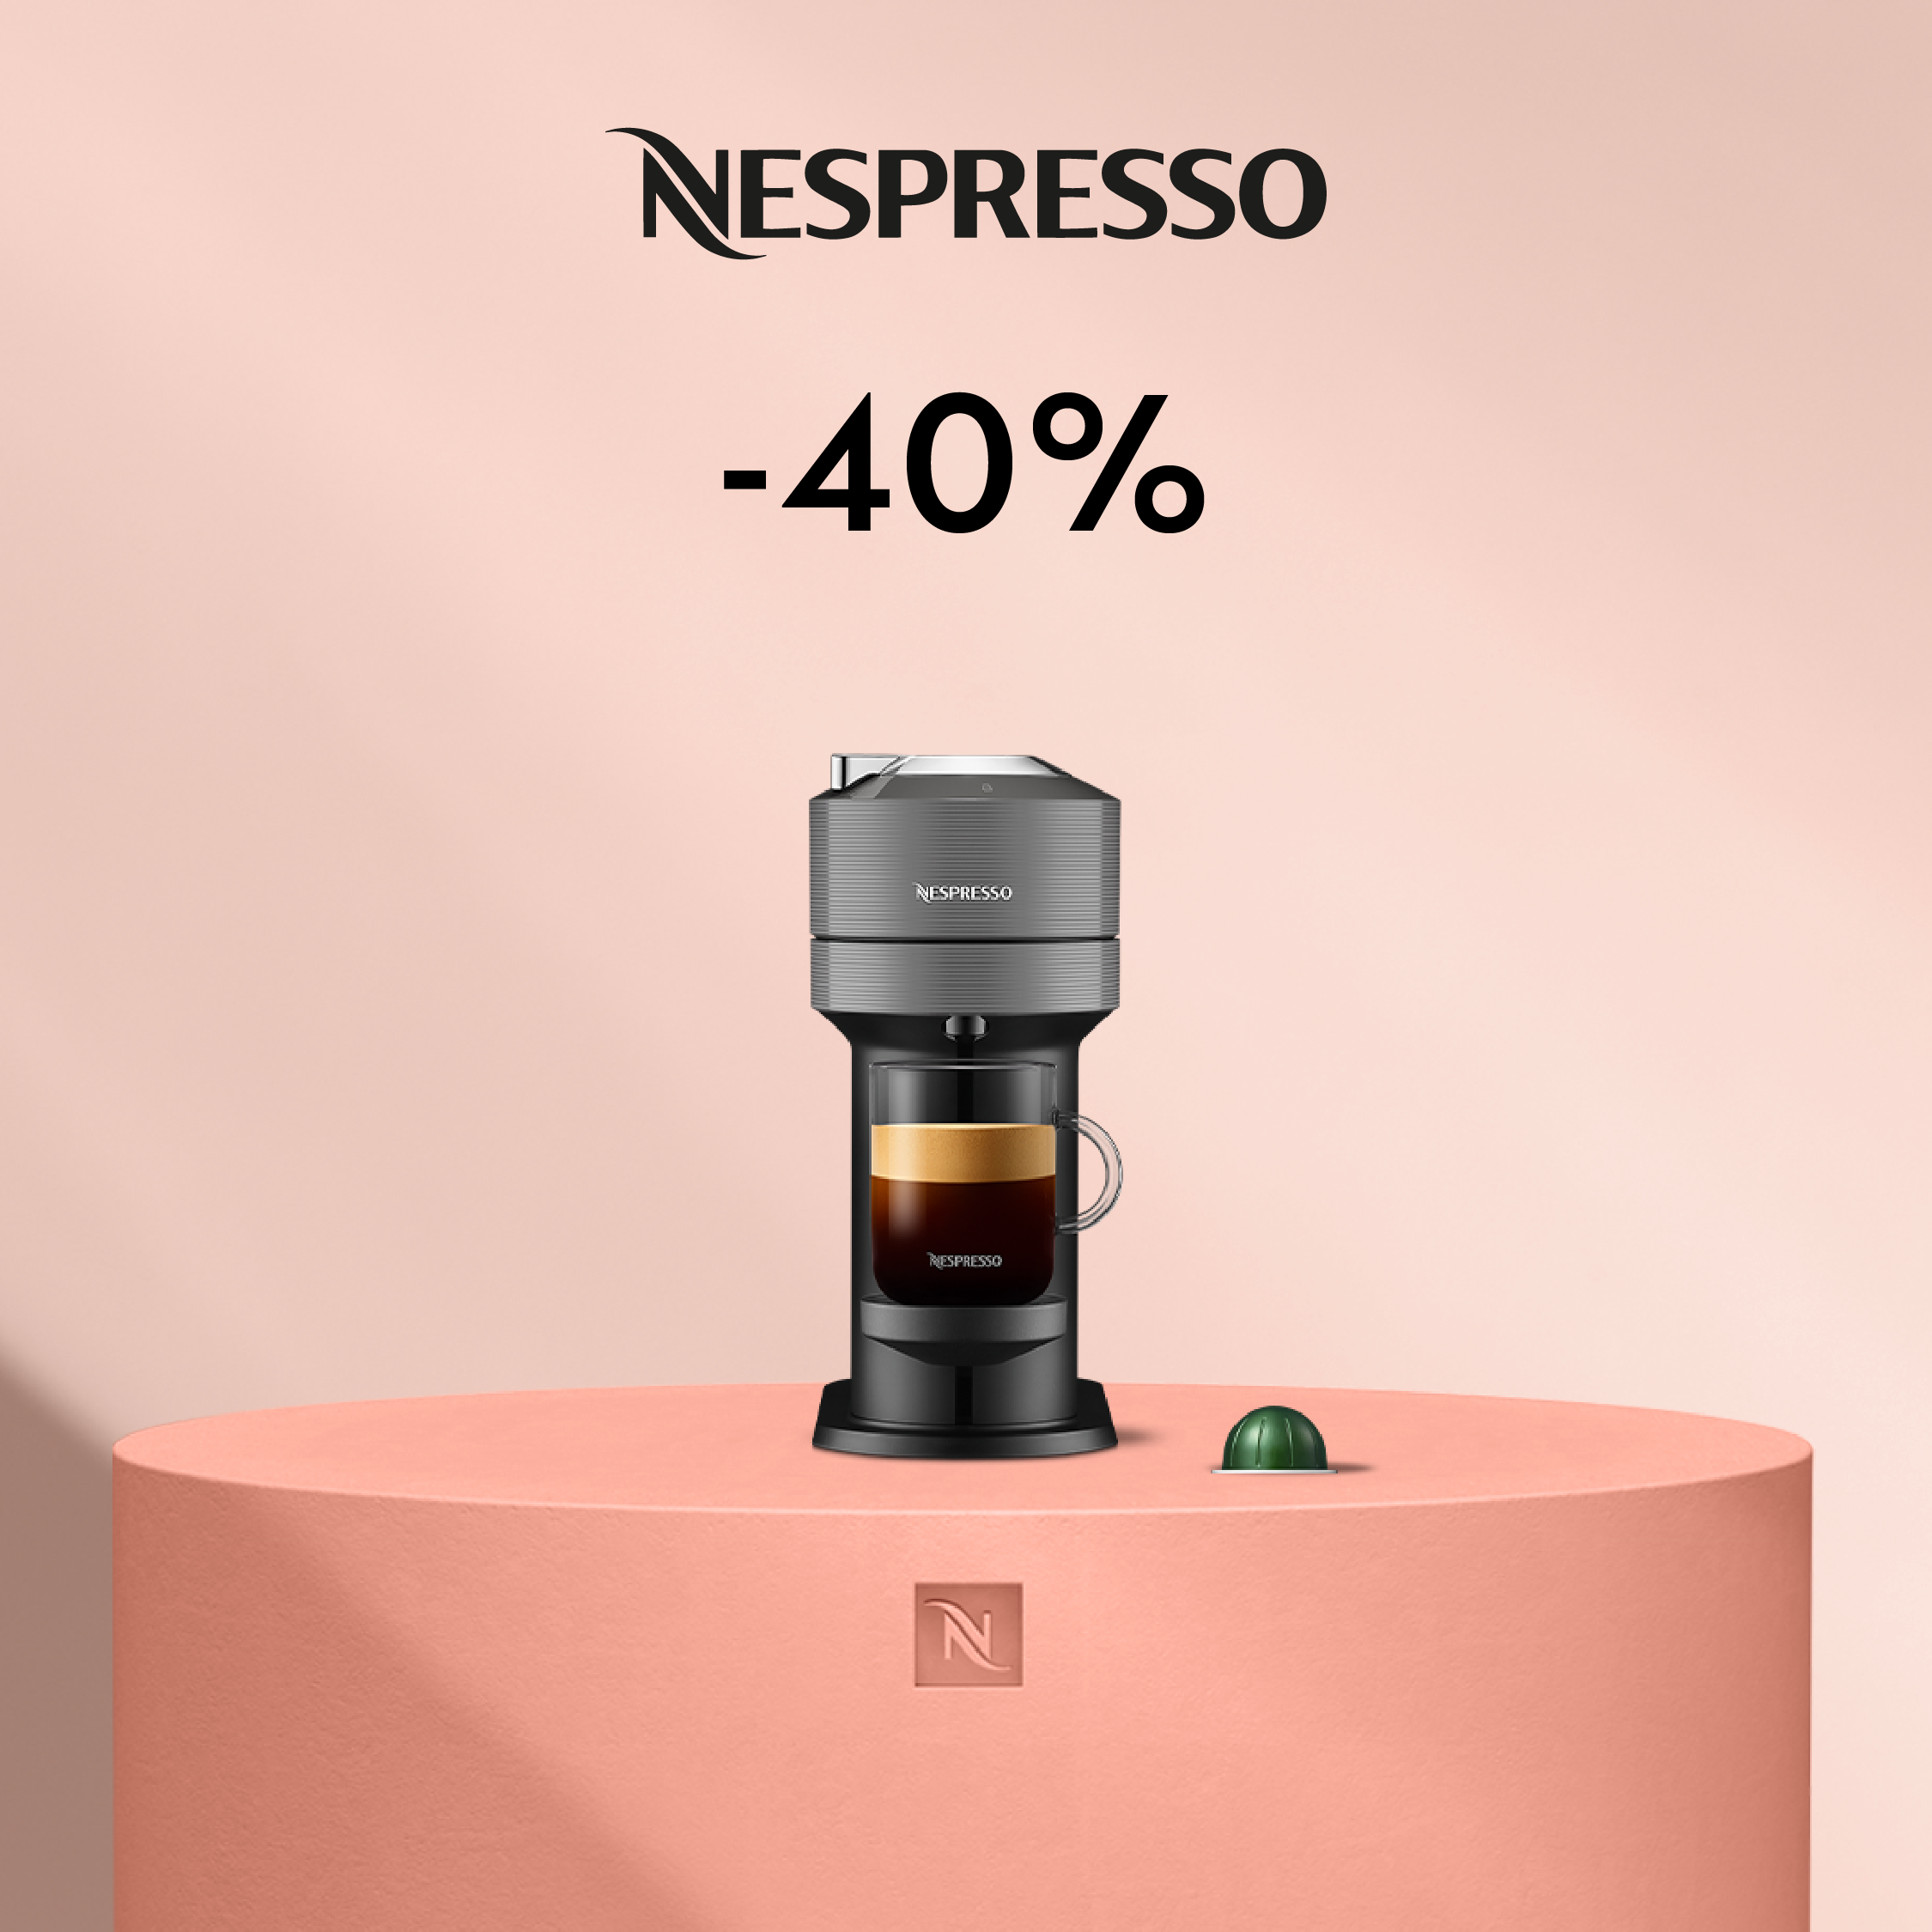 40% DISCOUNT ON THE VERTUO NEXT COFFEE MACHINE WHEN YOU BUY 80 CAPSULES!